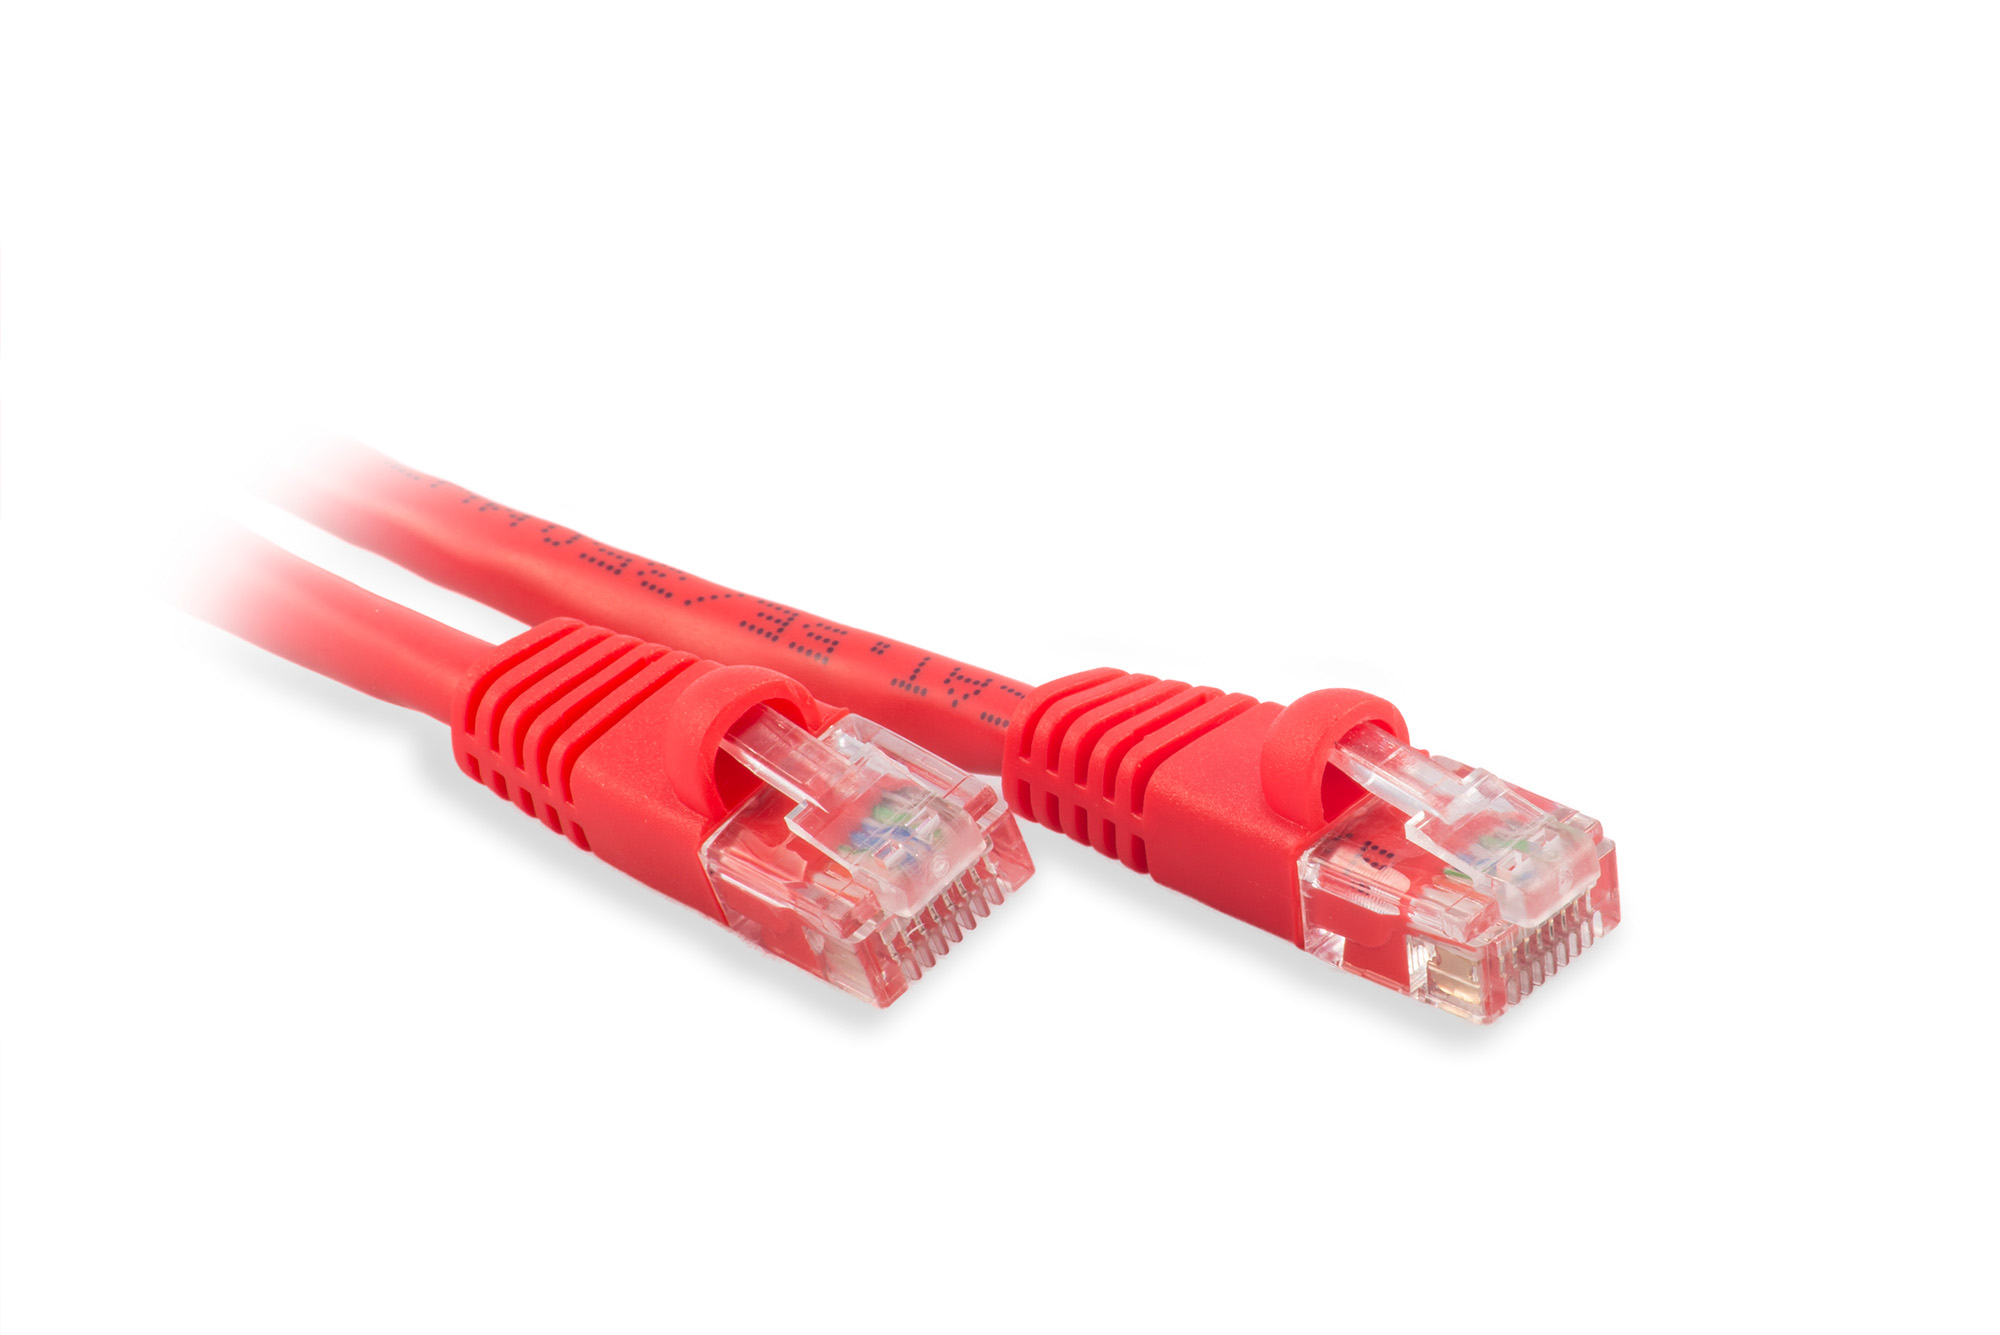 7ft Cat5e Ethernet Patch Cable - Red Color - Snagless Boot, Stranded, RJ45, 350Mhz, 24AWG